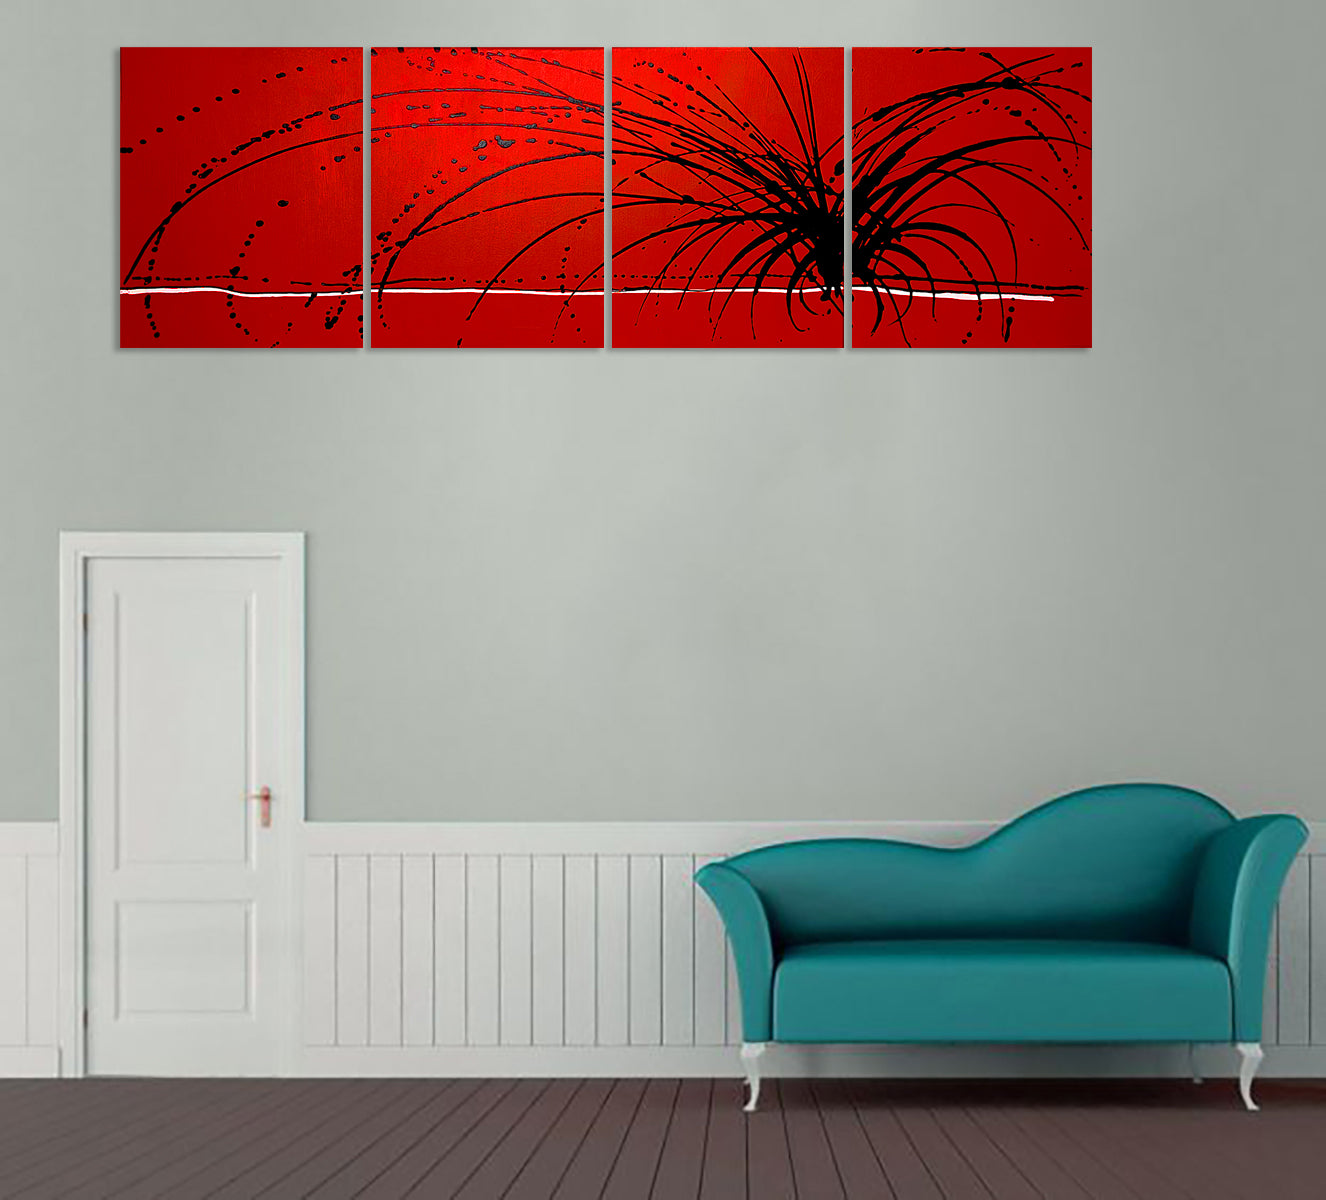 four panel painting in red and black on grey wall